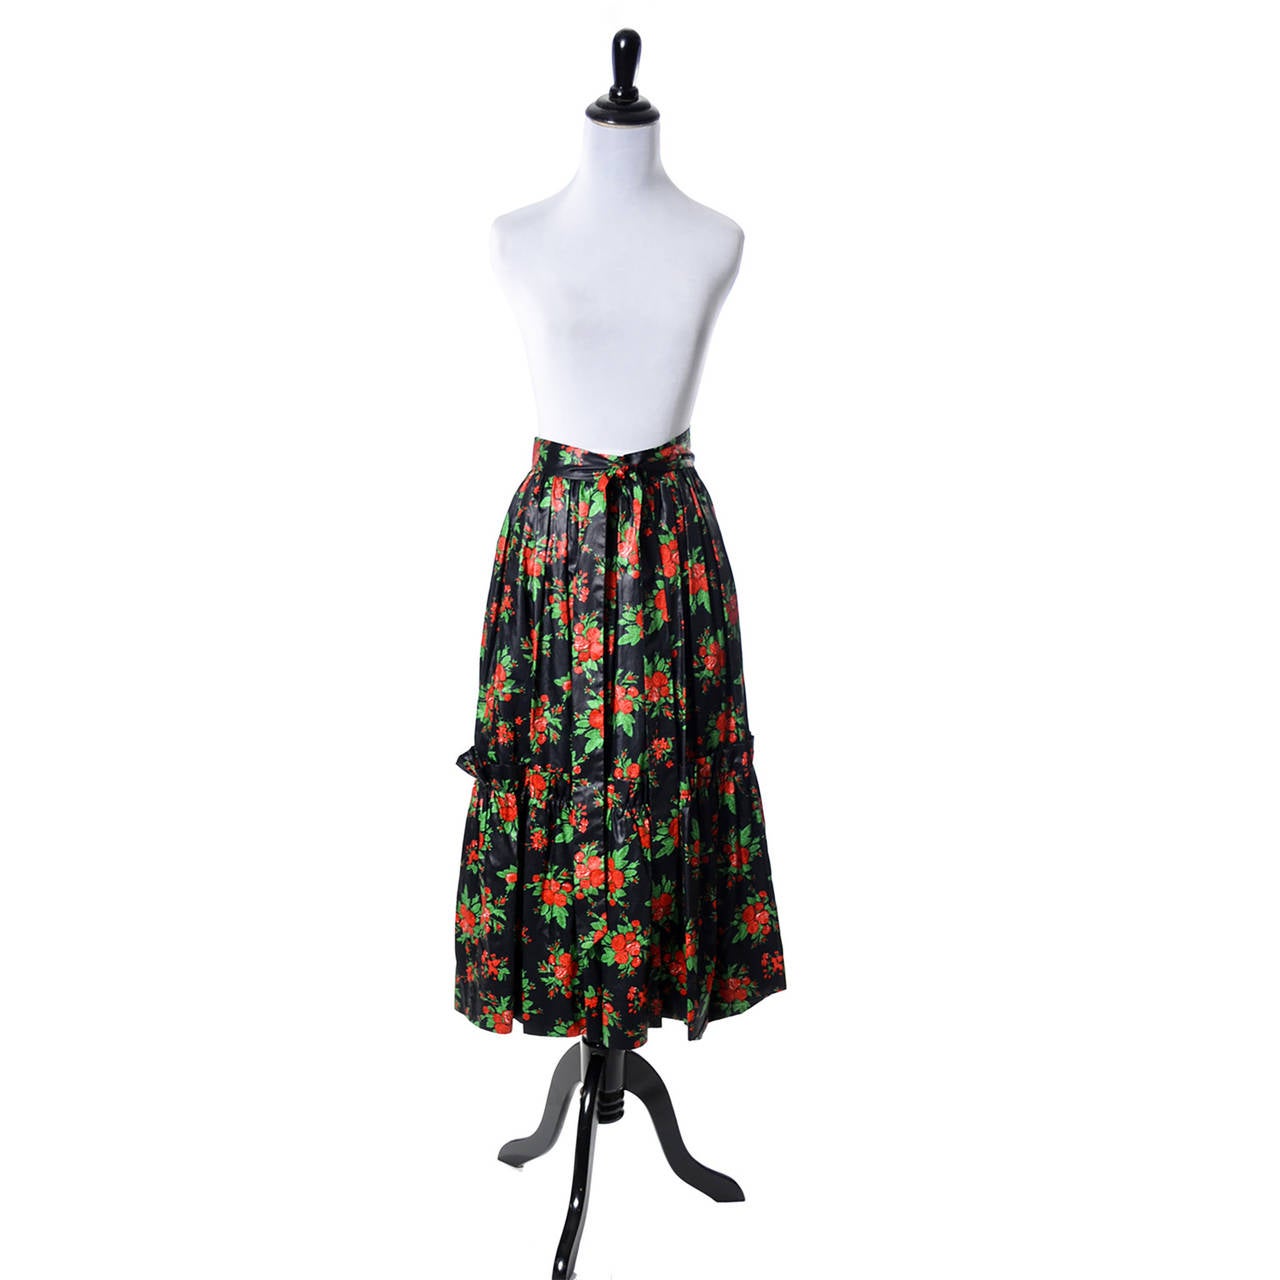 This beautiful polished cotton skirt from YSL was made in France in the 1970s. A wonderful Yves Saint Laurent Rive Gauche ruffled Russian style peasant skirt in a gorgeous floral print.  This collectible YSL vintage skirt has a side zipper, fabric